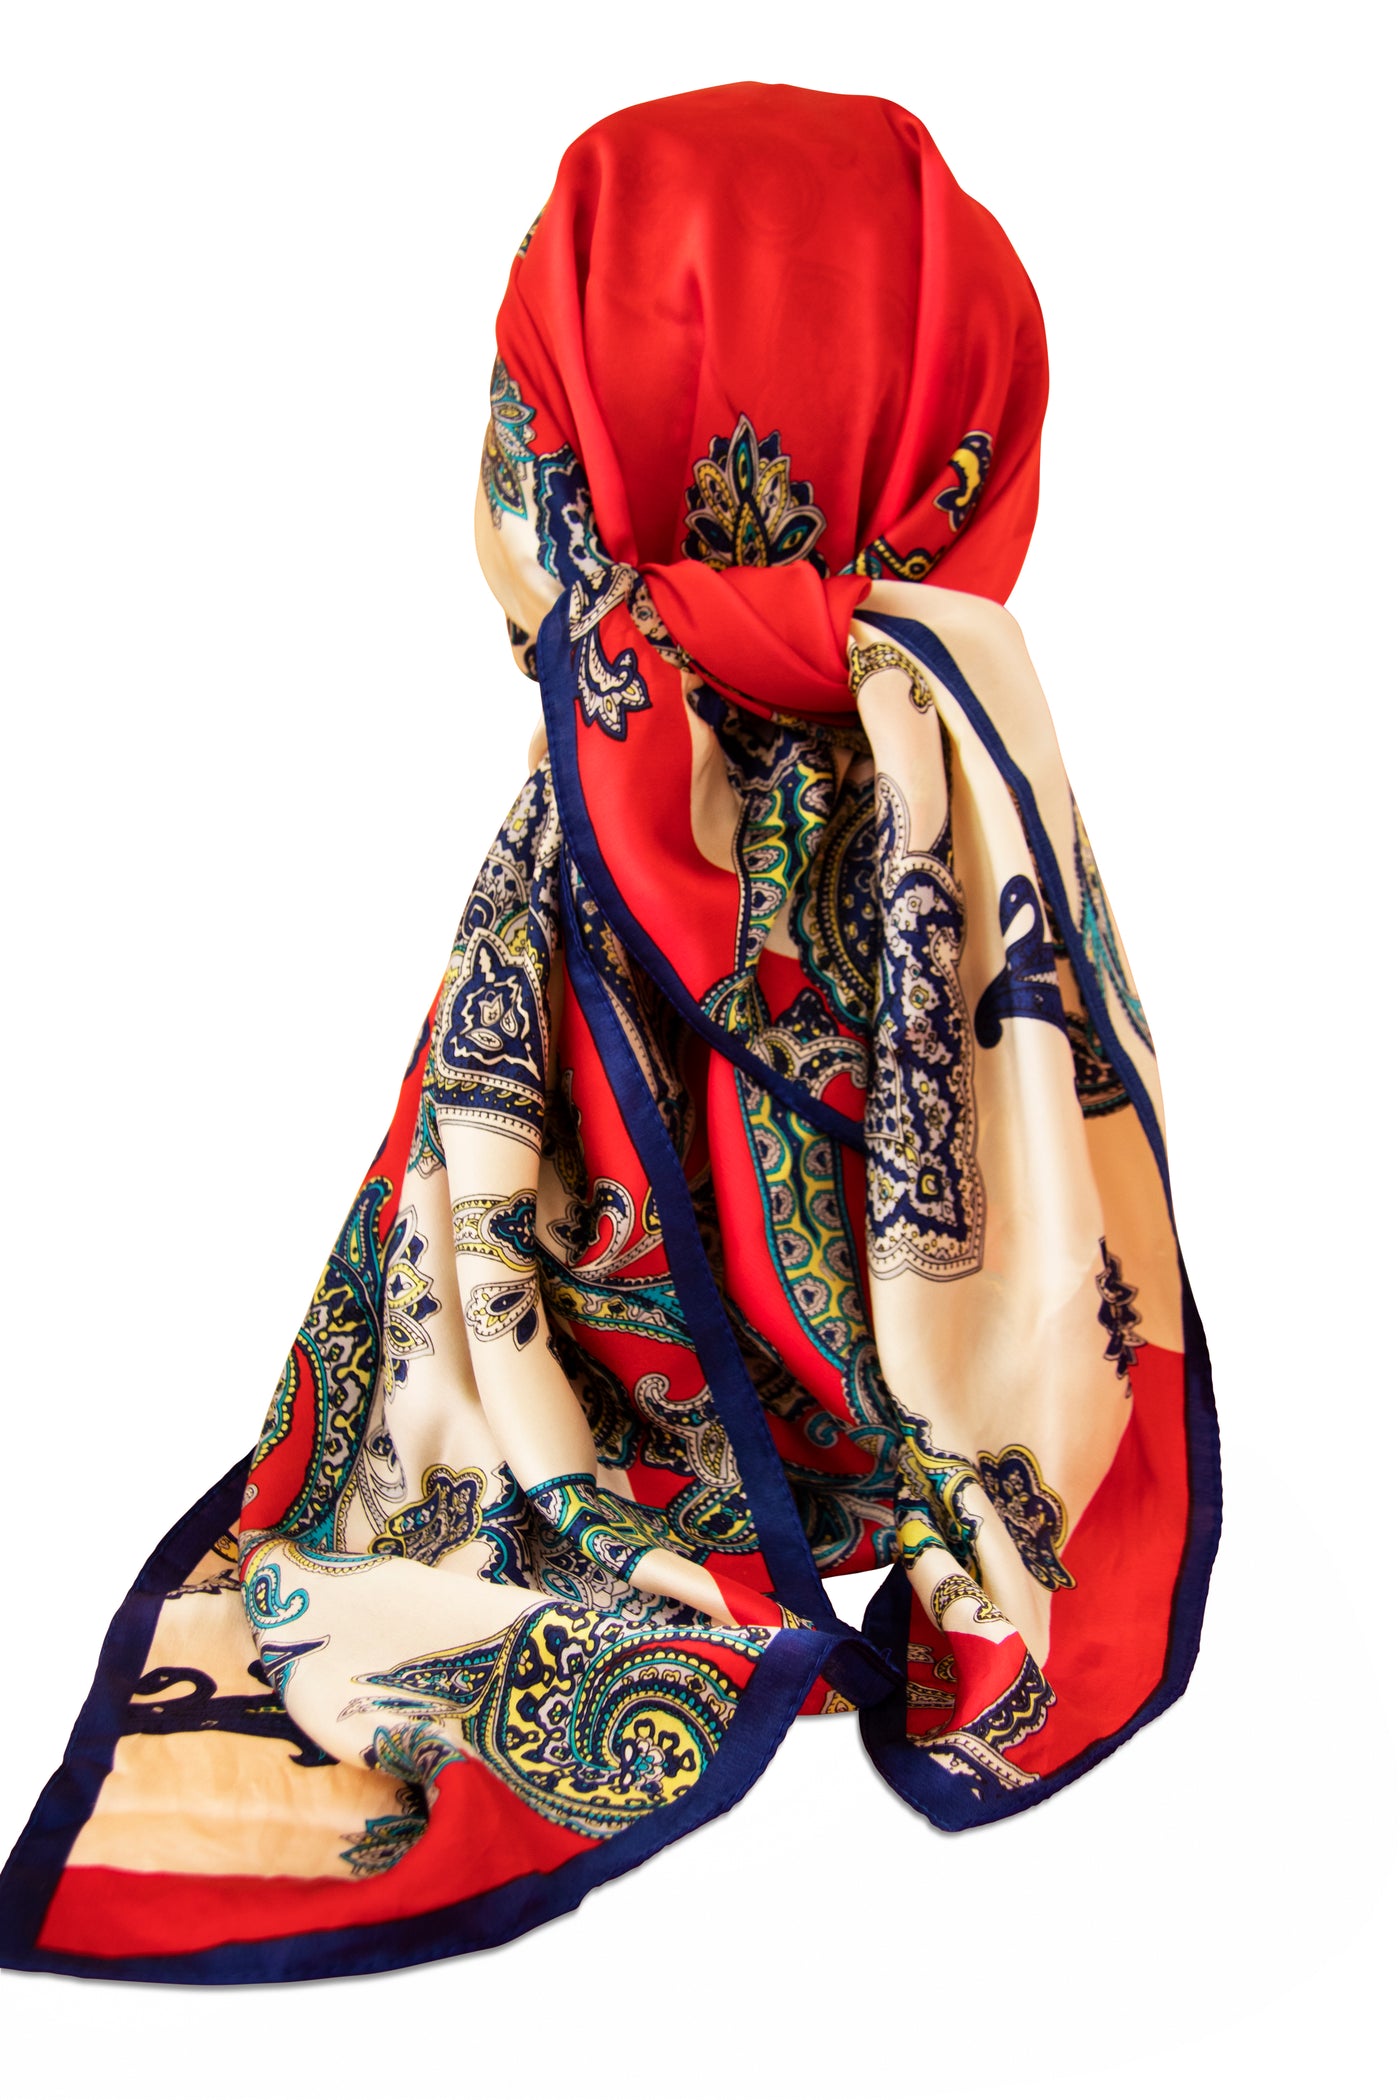 100% Pure Mulberry Silk Scarves